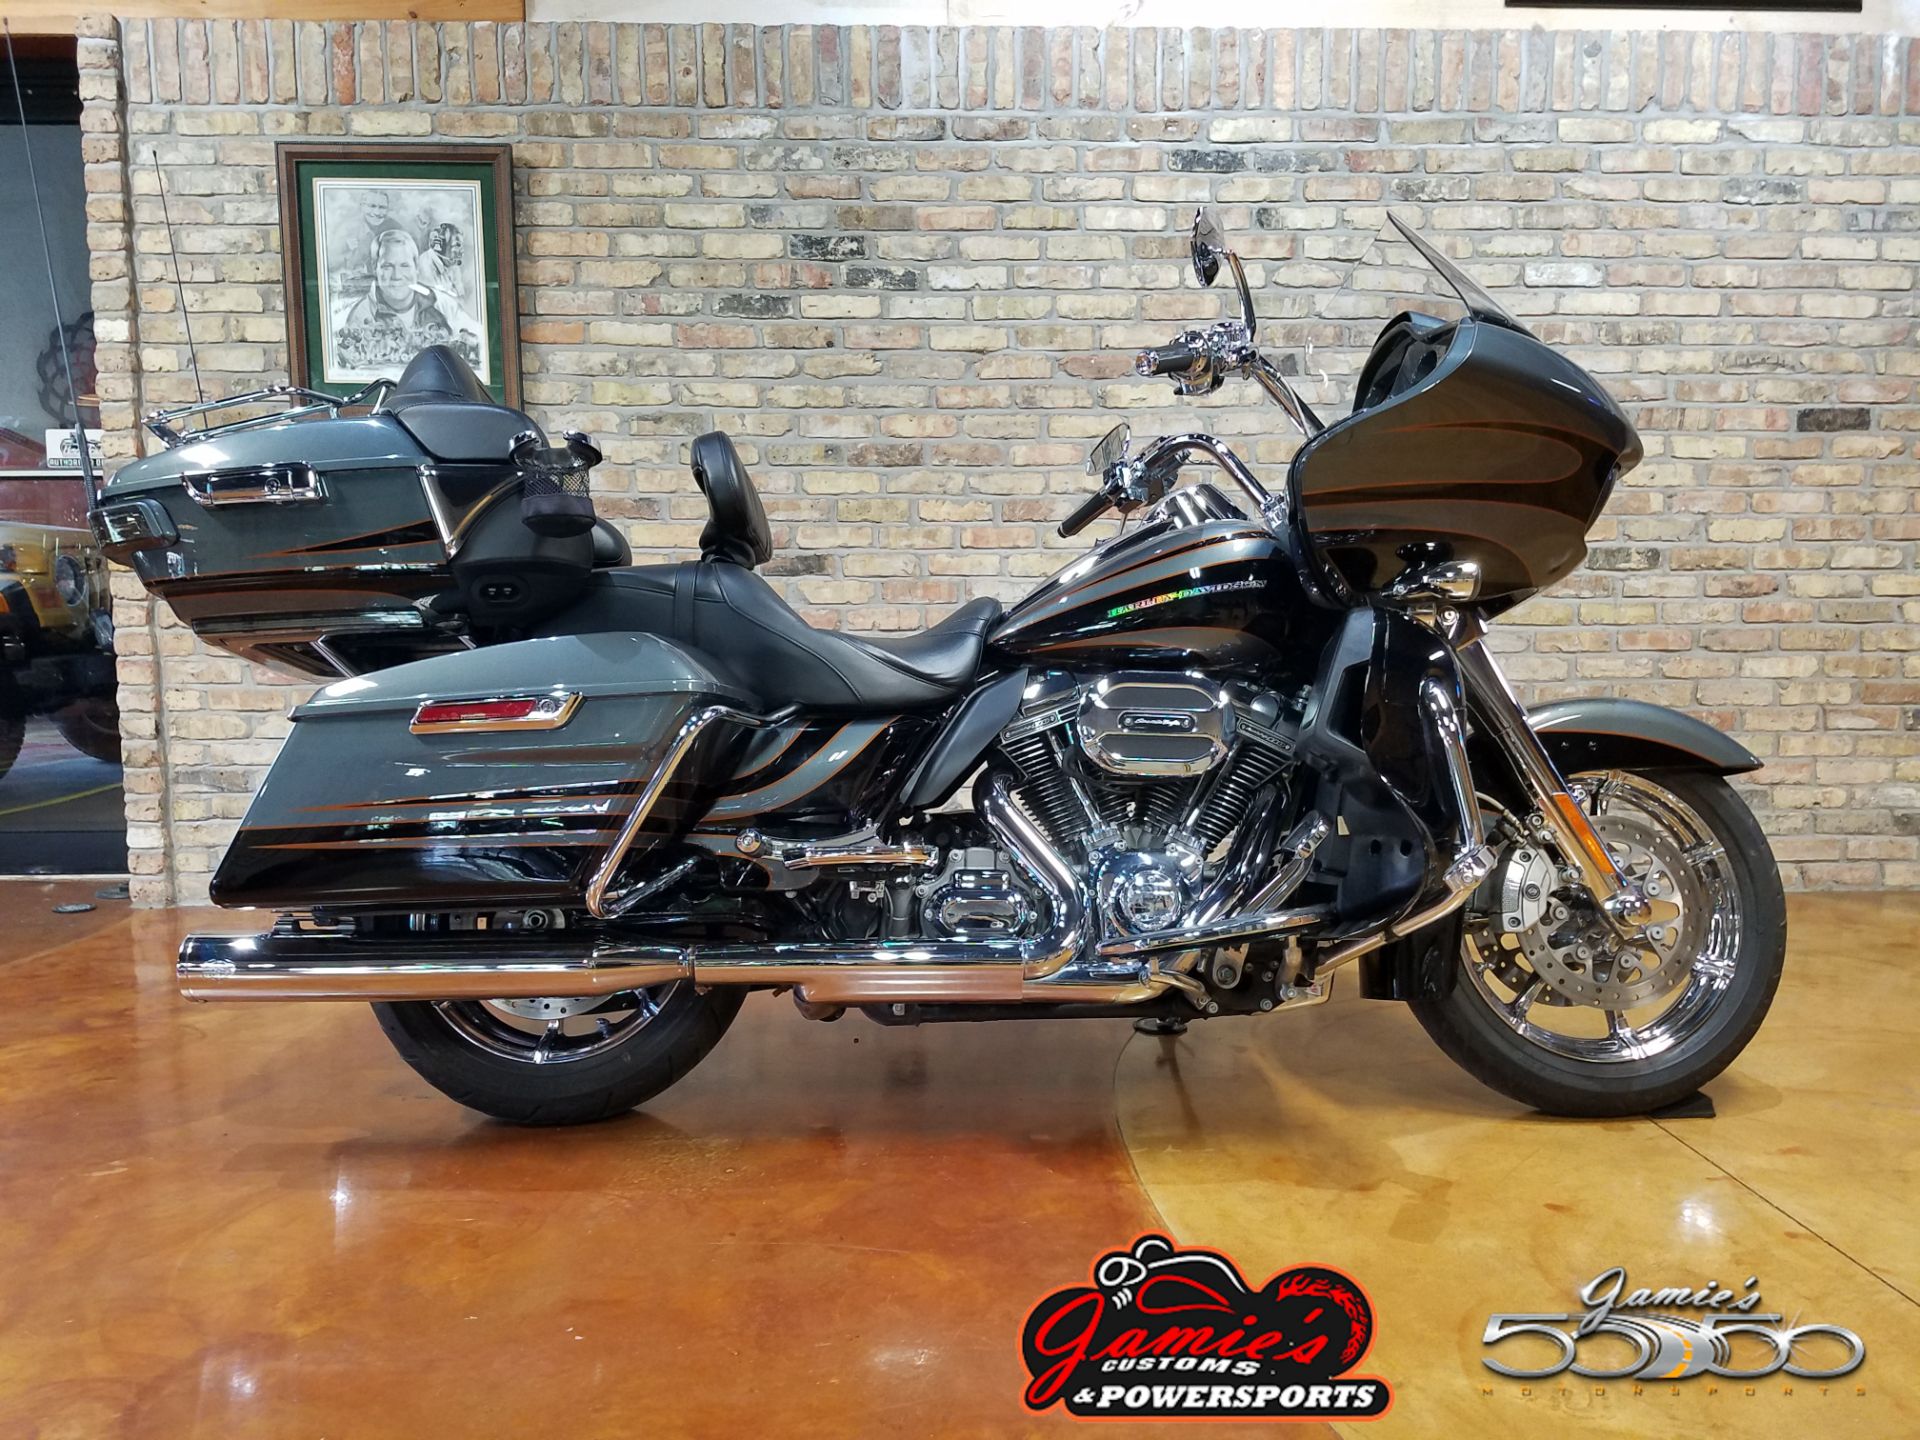 Used 2016 Harley Davidson Cvo Road Glide Ultra Motorcycles In Big Bend Wi 4411 Charcoal Slate Carbon Dust